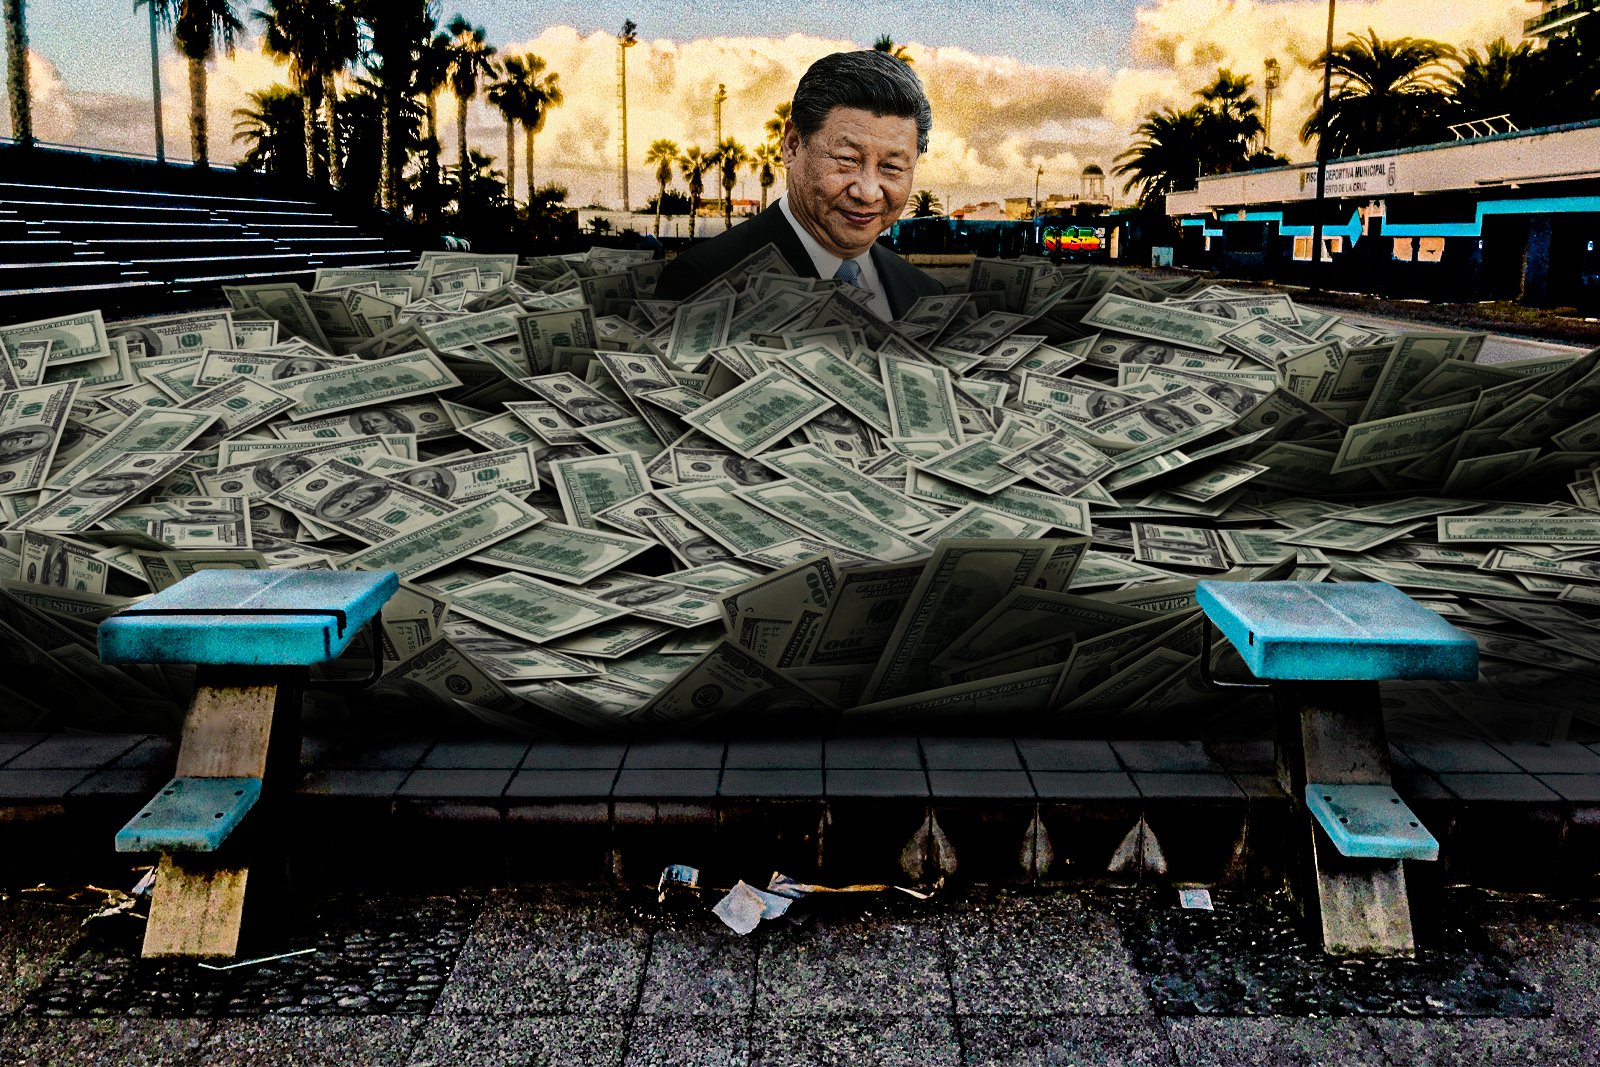 Xi Jinping in a pool of money